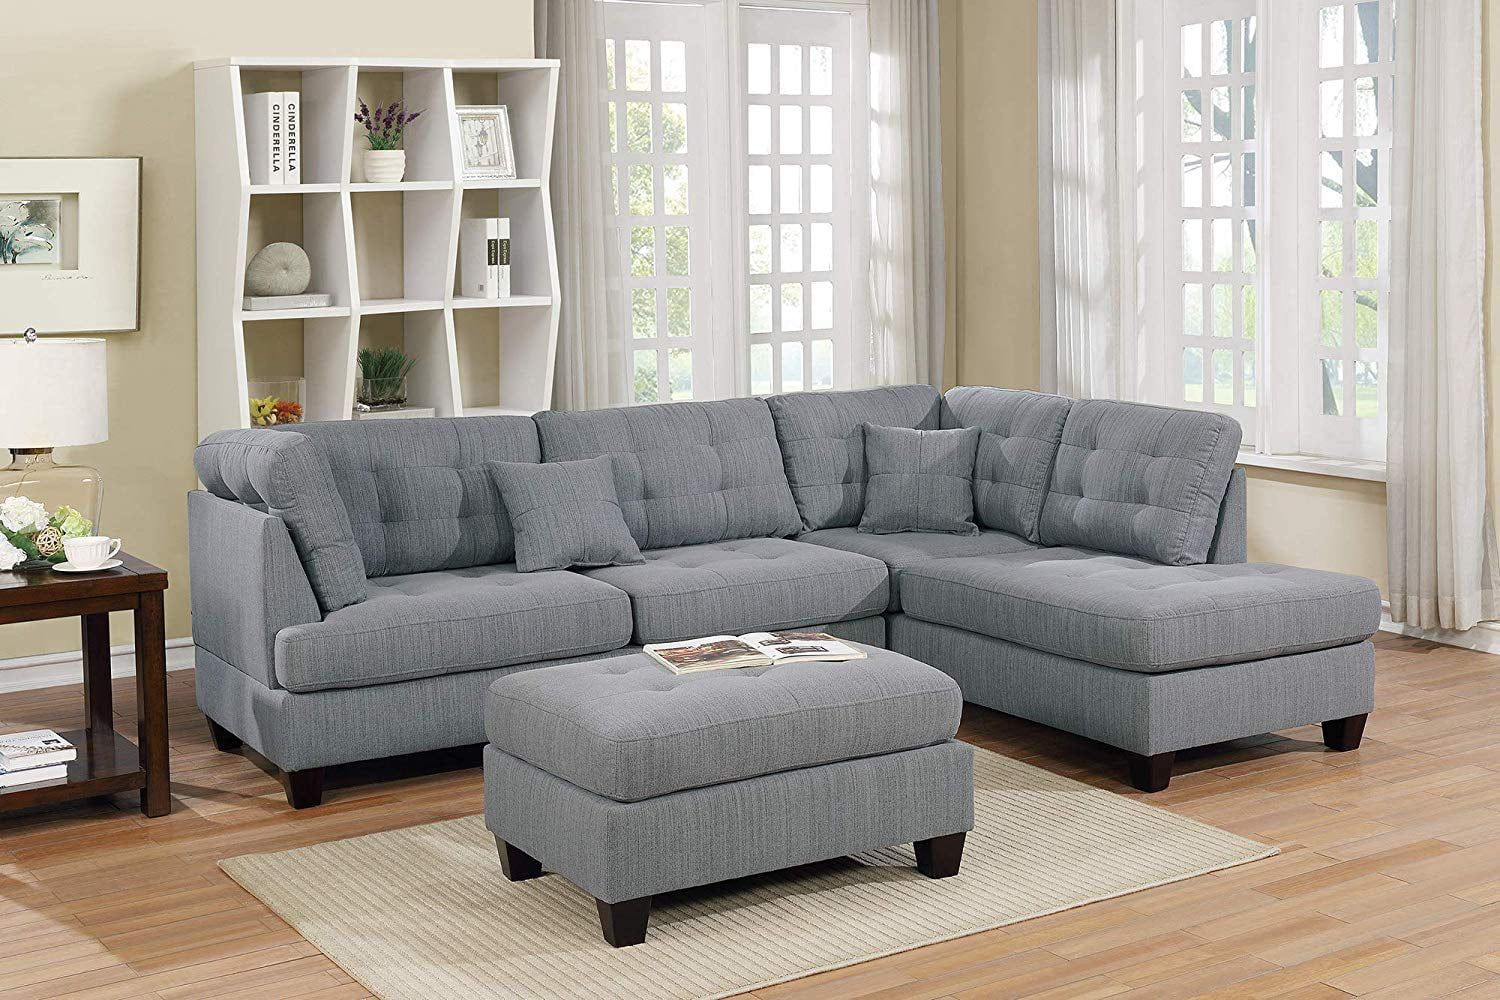 Modern Reversible Grey Linen Like Fabric Sectional Sofa Set With Tufted Regarding Gray Linen Sofas (View 14 of 20)